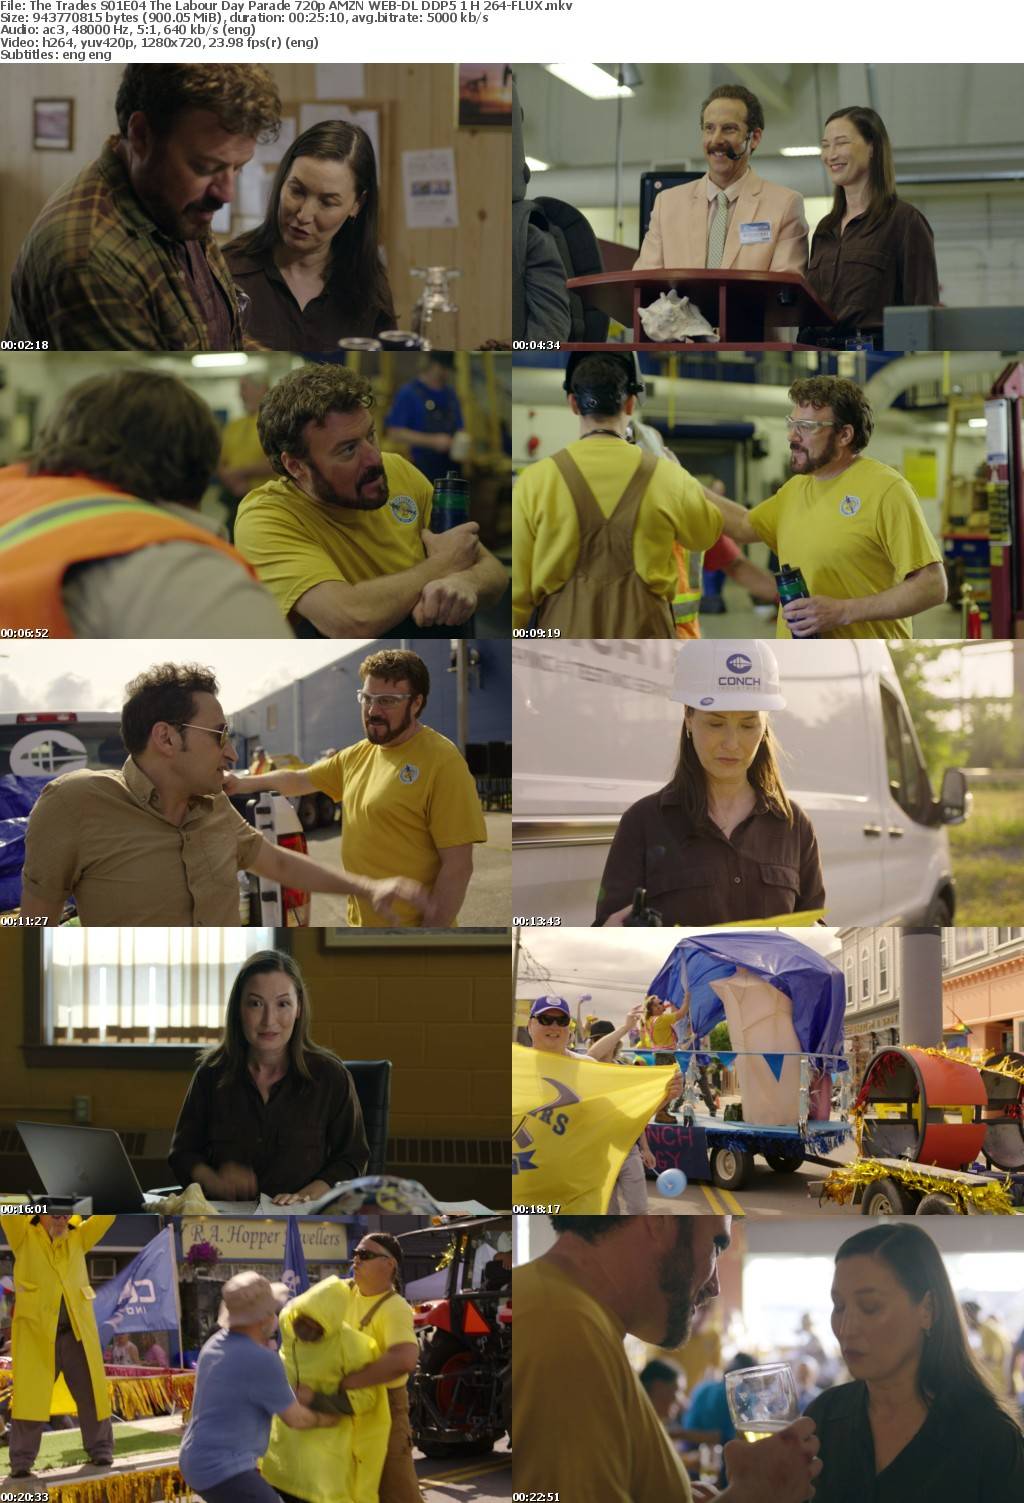 The Trades S01E04 The Labour Day Parade 720p AMZN WEB-DL DDP5 1 H 264-FLUX